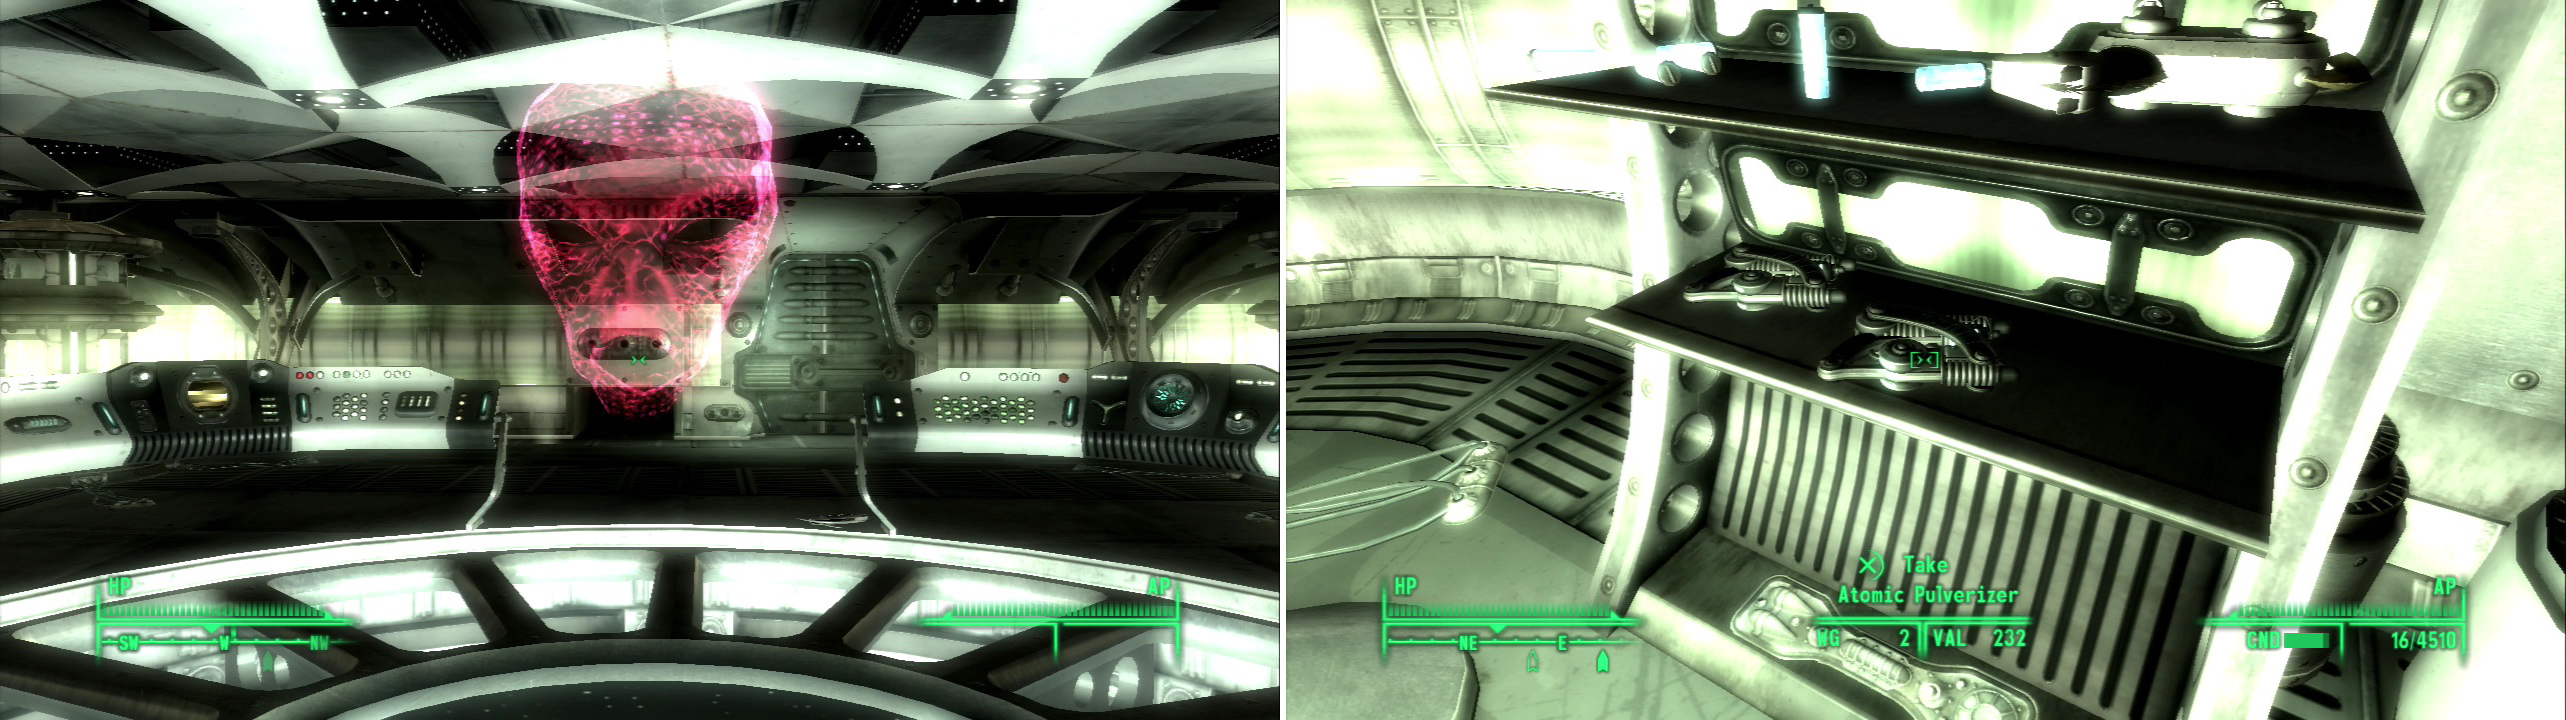 A disembodied alien shows up to issue some idle threats (left). Little does he know, we already destroyed our own planet! The Alien Pulverizer is a significant upgrade over the standard alien sidearm (right).